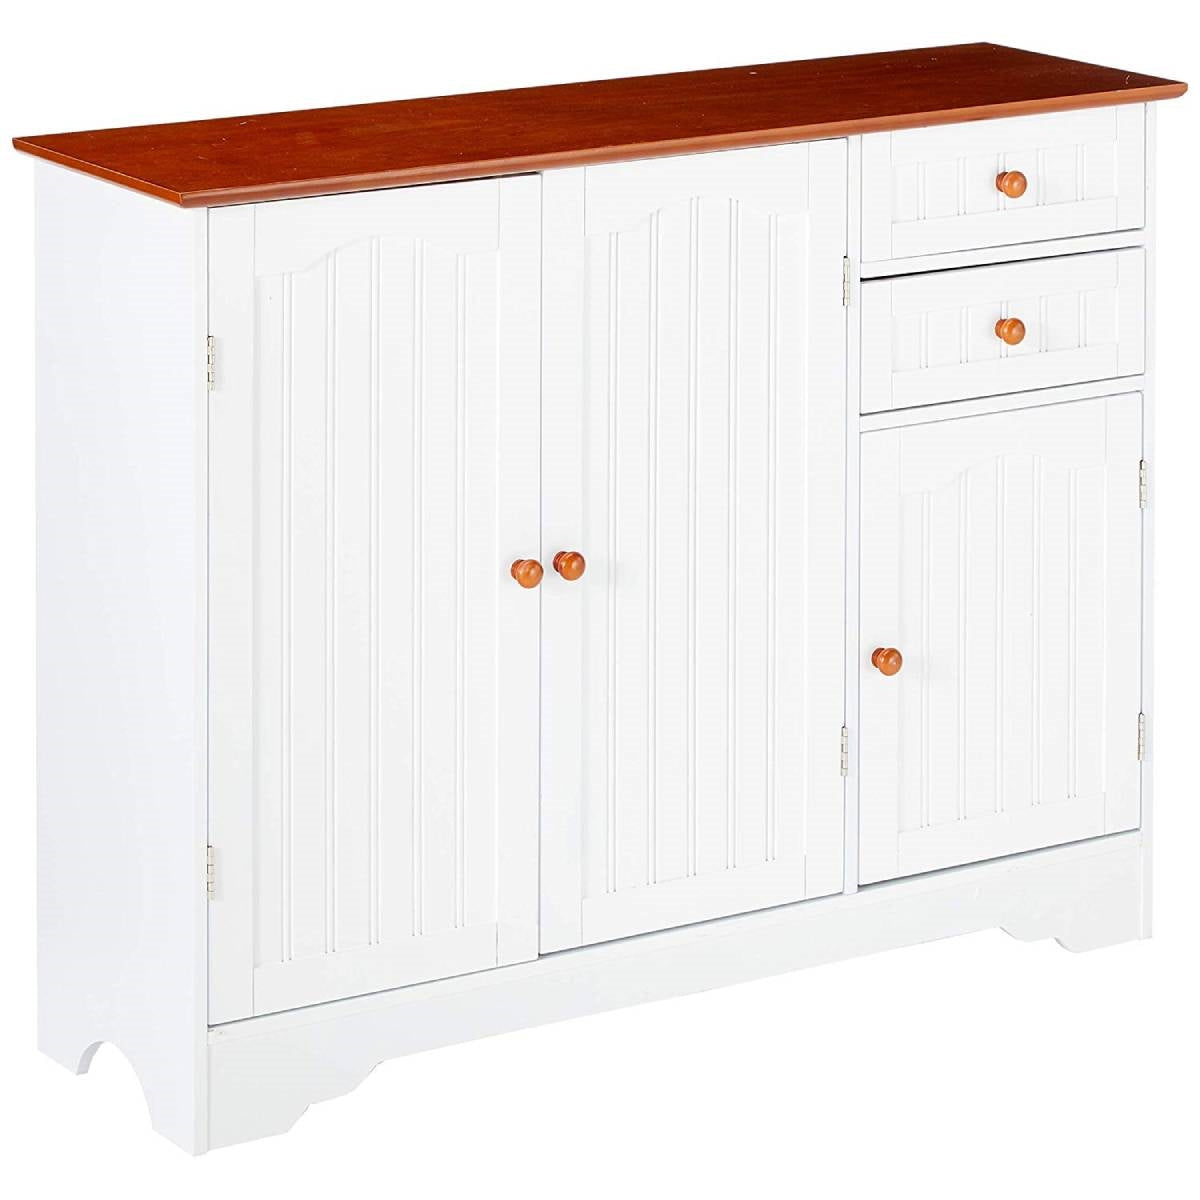 Dining > Sideboards & Buffets - White Wood Sideboard Buffet Cabinet With Walnut Finish Top And Knobs